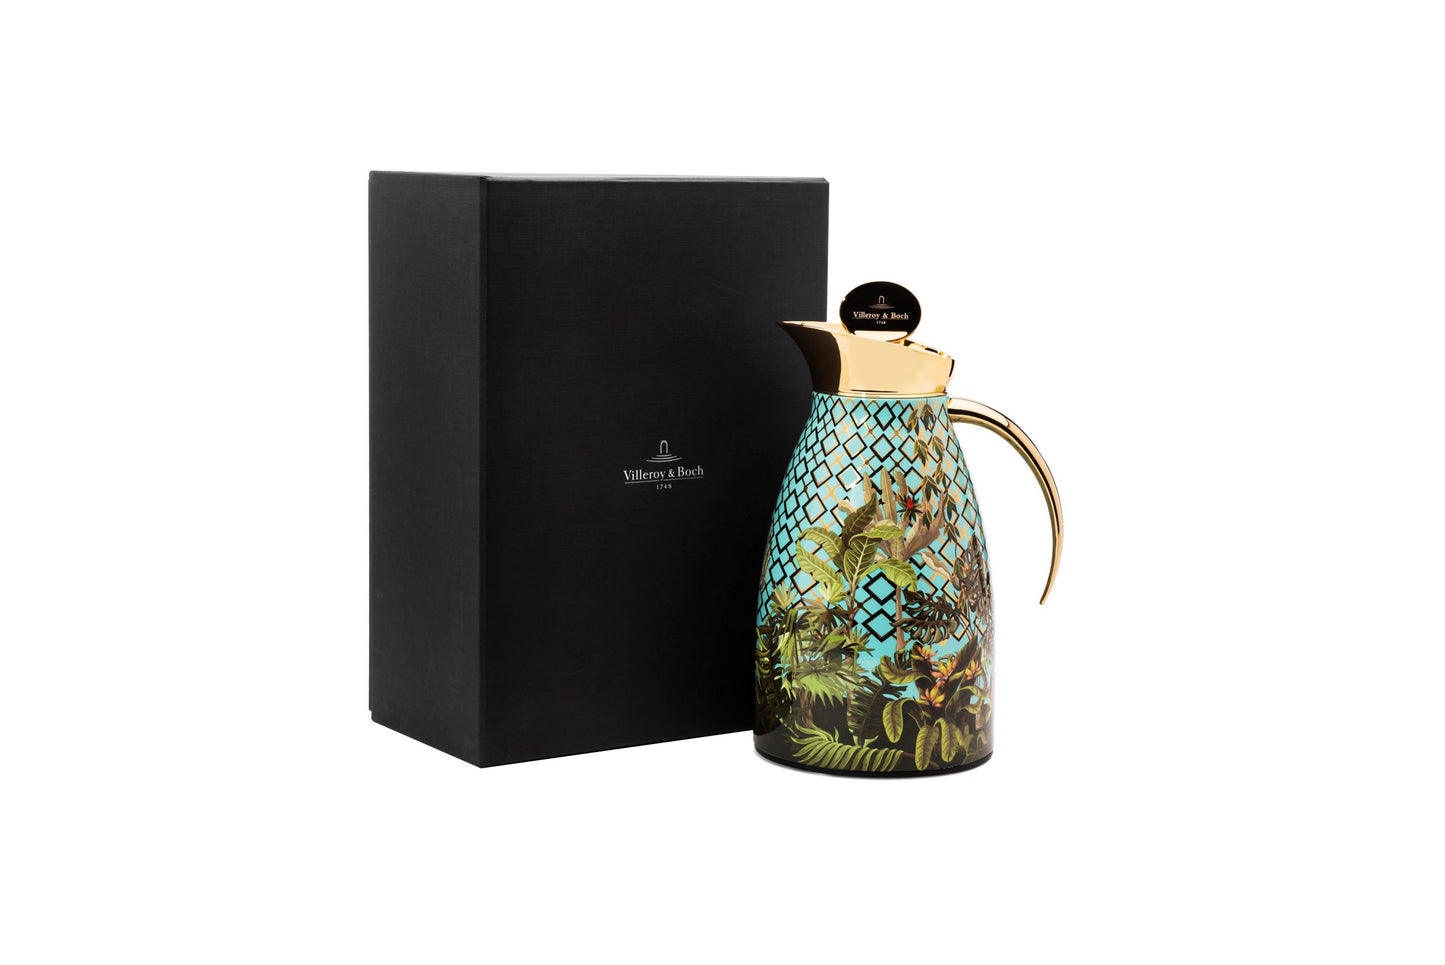 Amazonia 1L Thermos Gold Leaves